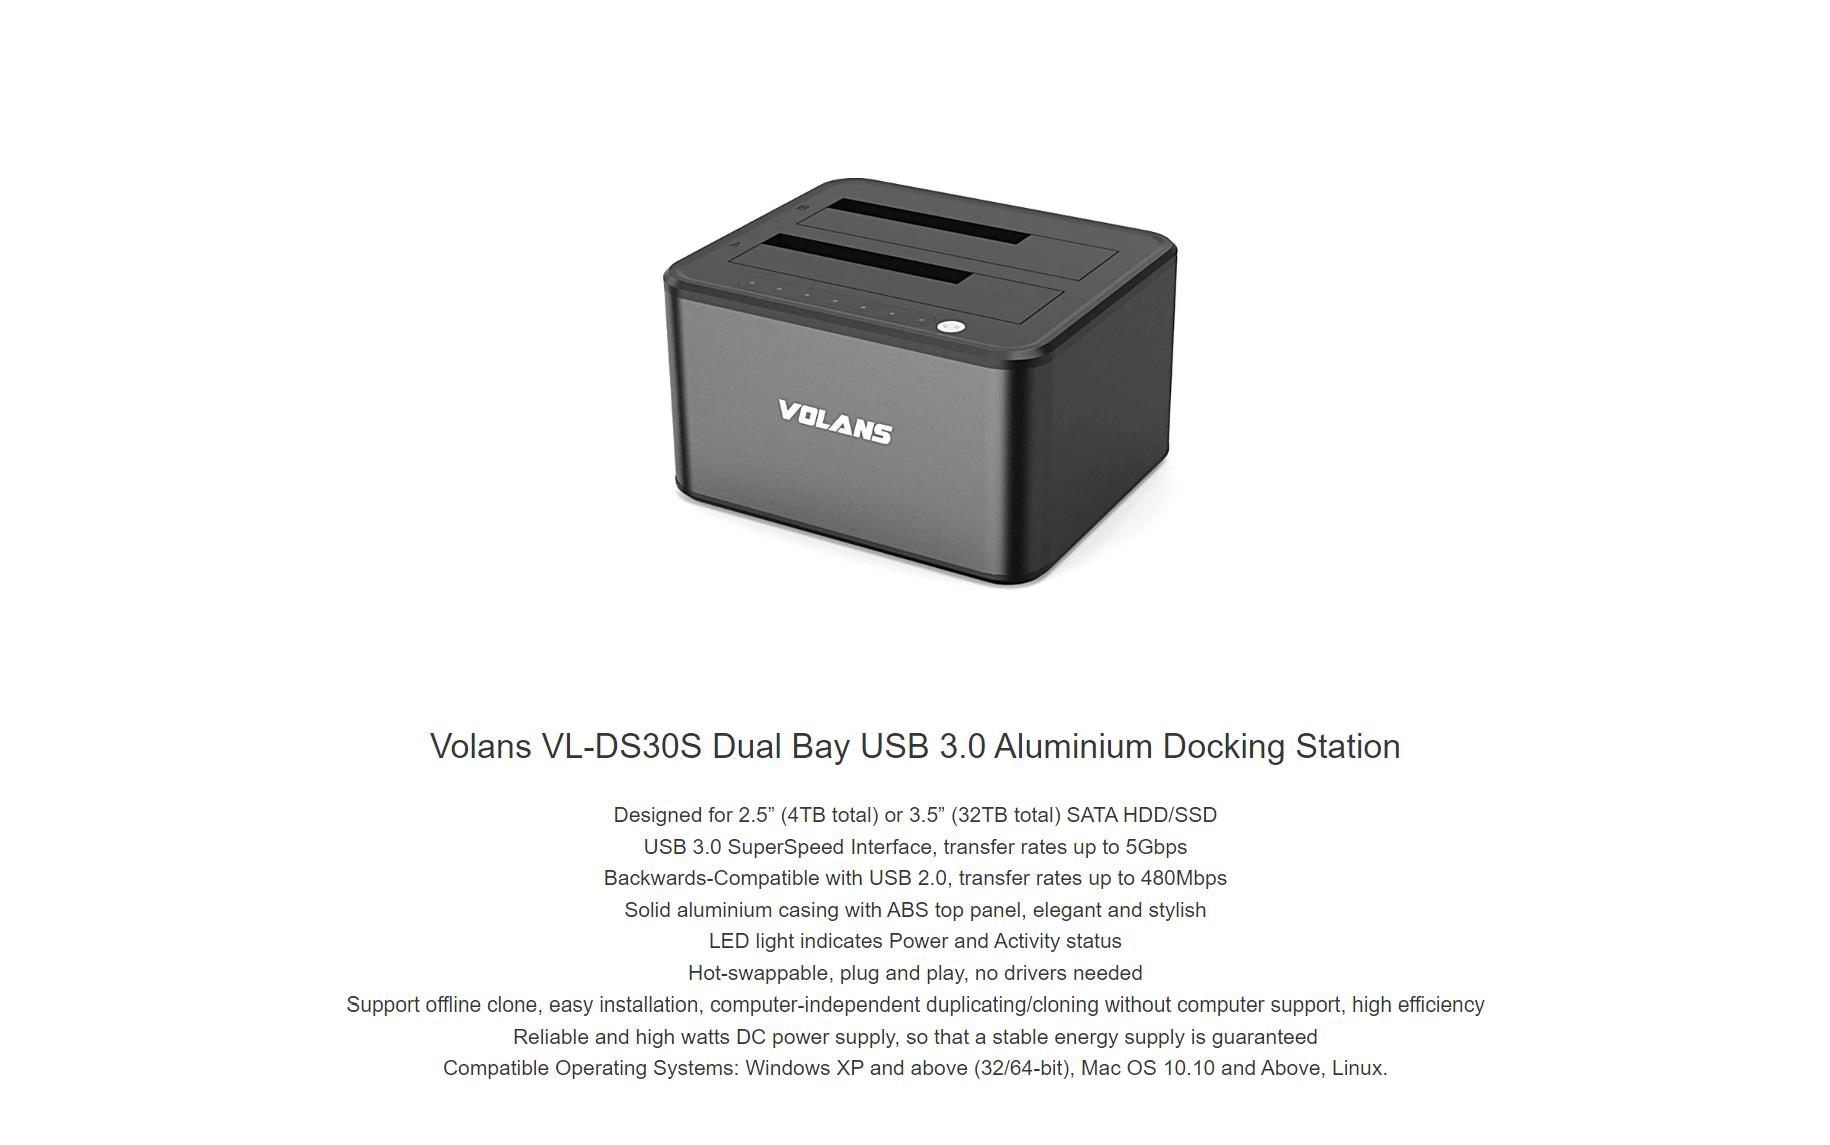 A large marketing image providing additional information about the product Volans VL-DS30S Aluminium Dual Bay USB 3.0 Docking Station - Additional alt info not provided